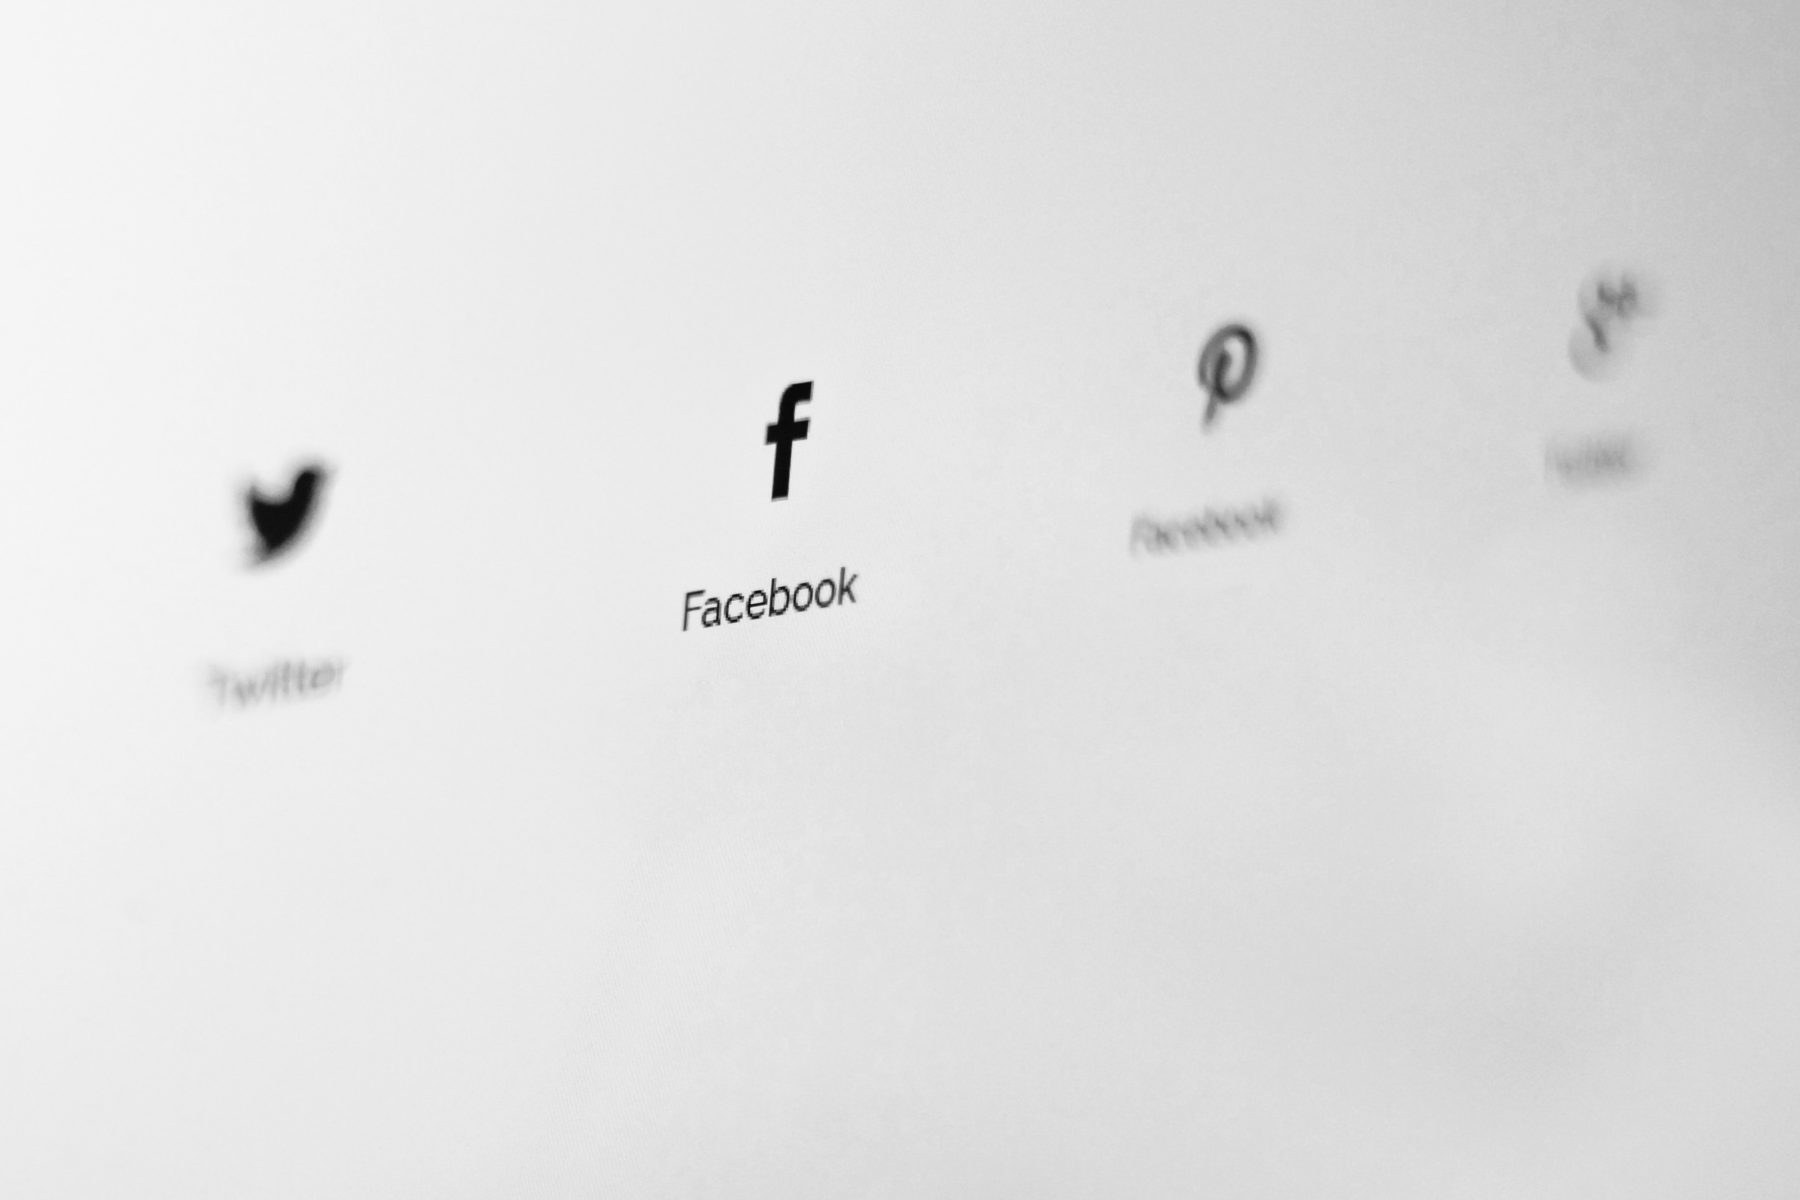 The Twitter, Facebook, Pinterest and Tik Tok icons, with the Facebook symbol the most in focus.